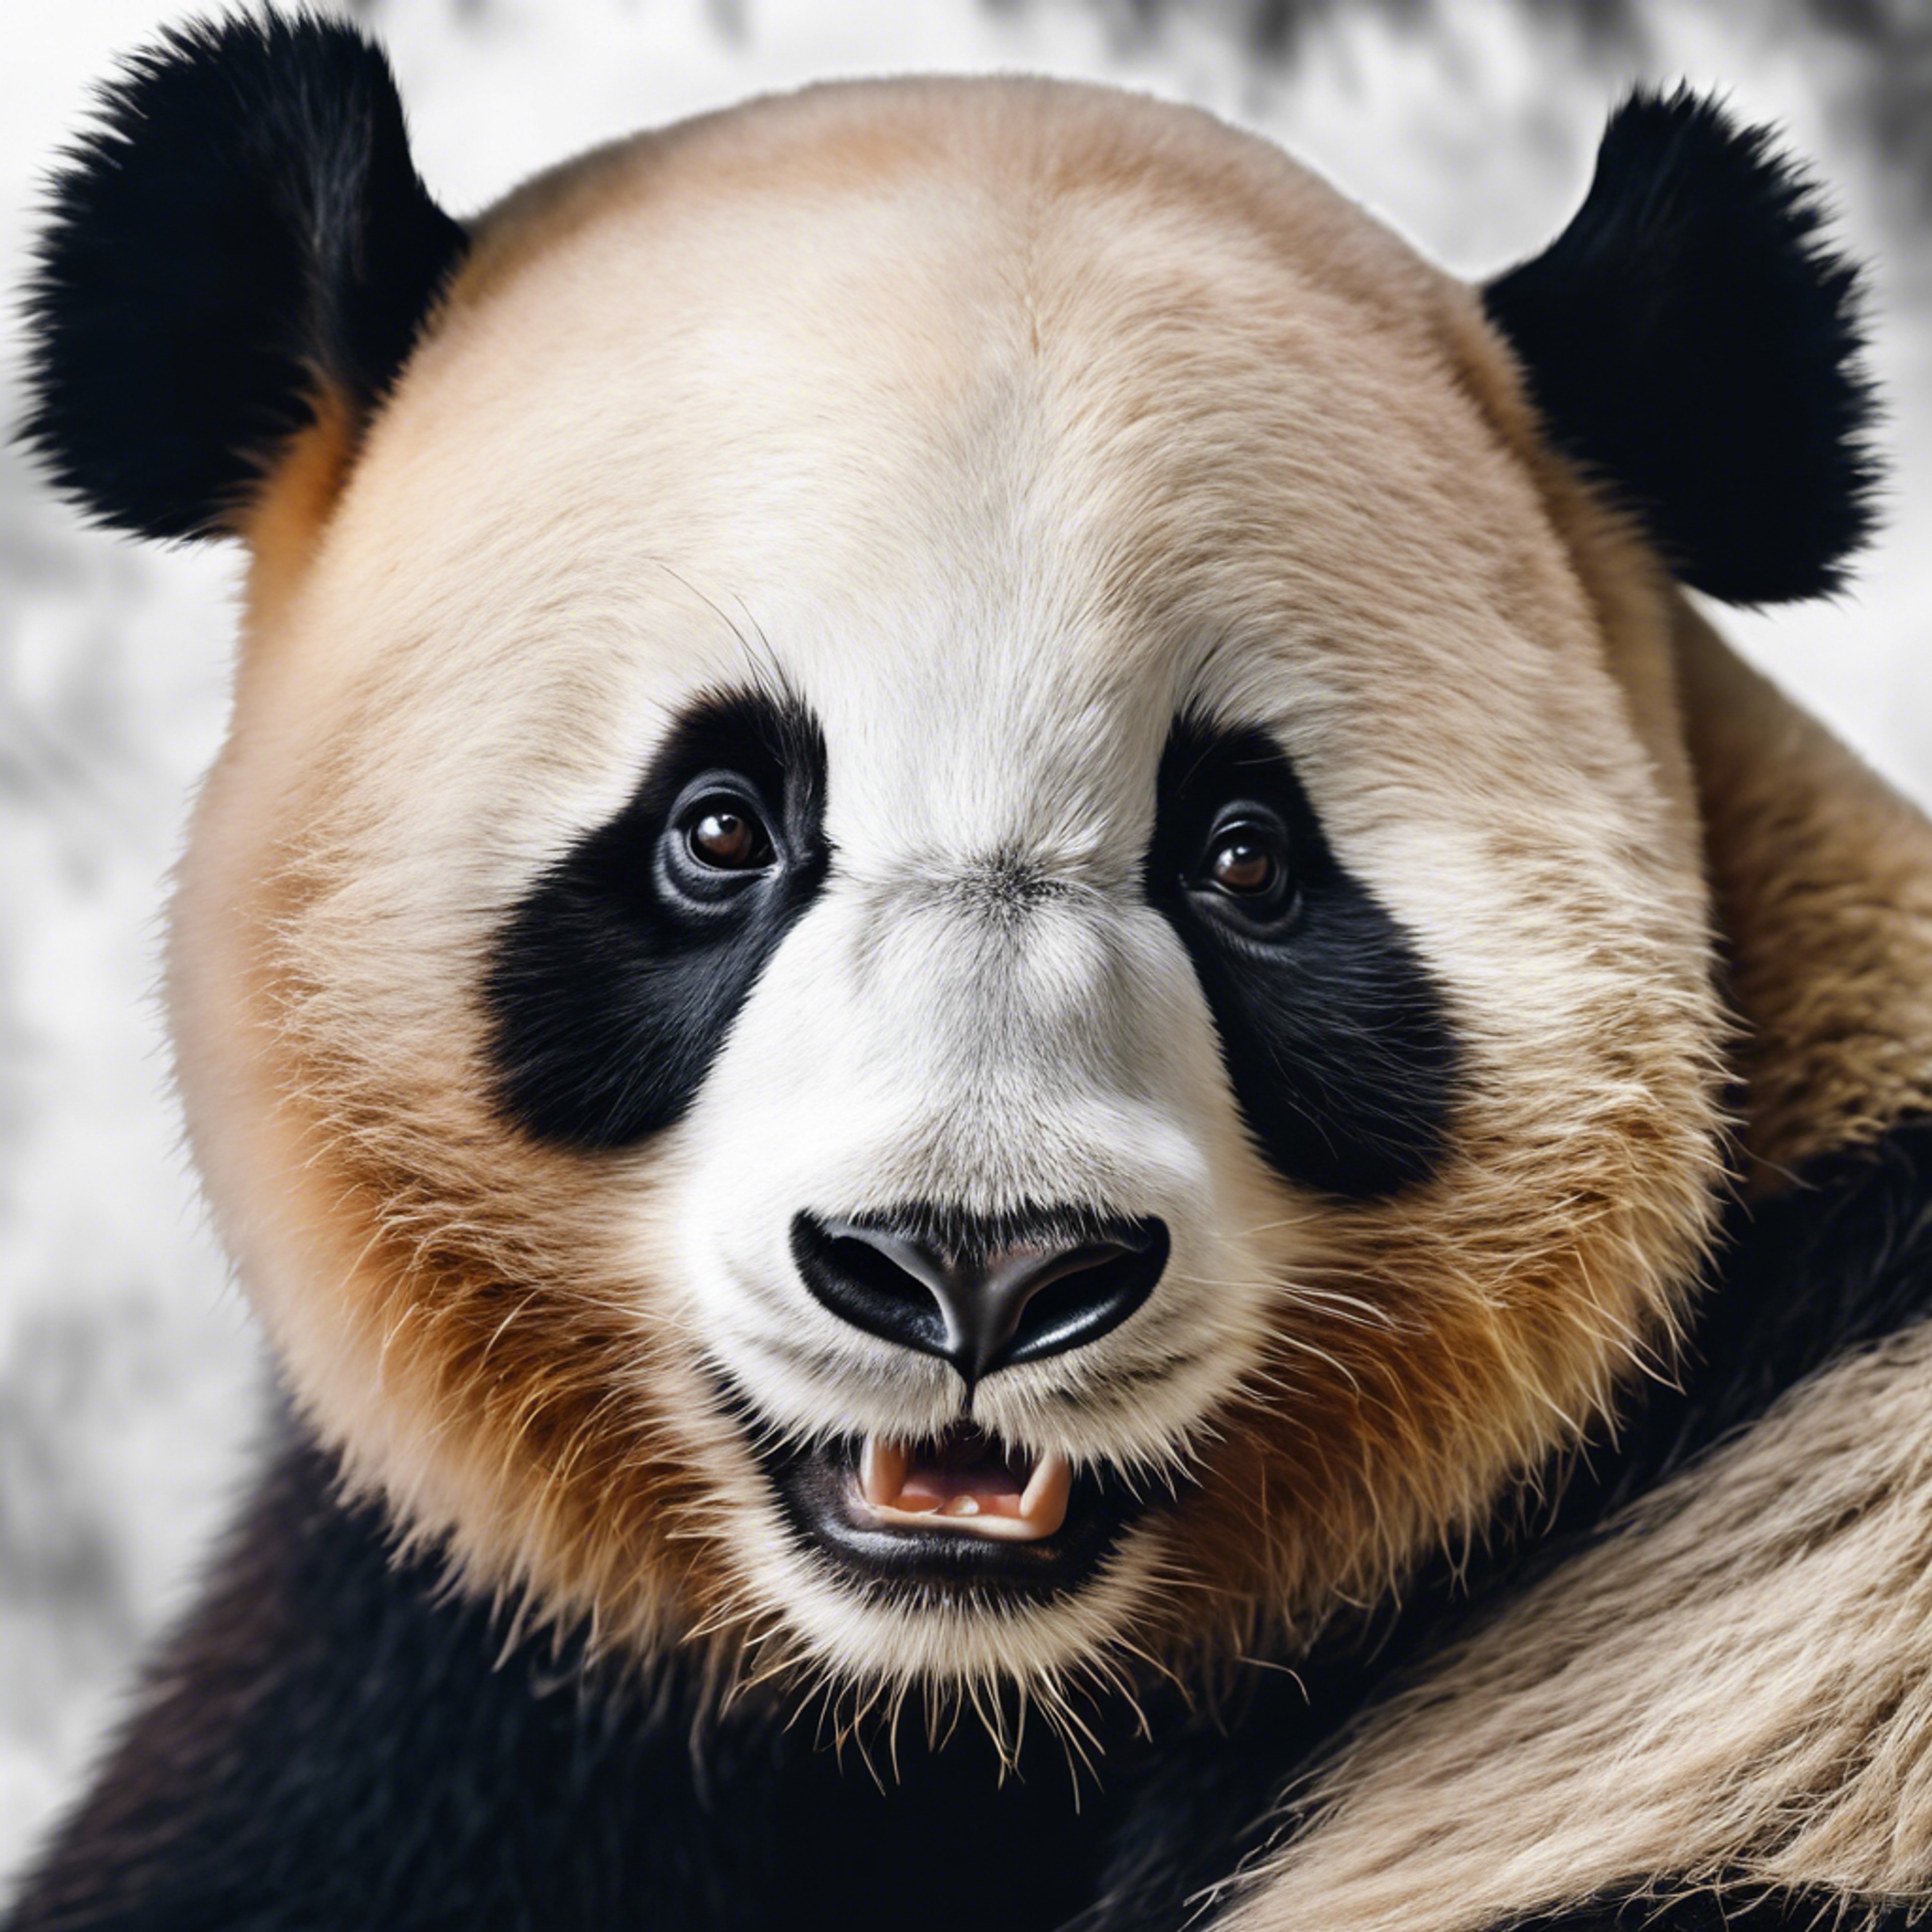 A close-up portrait of a smiling panda, showcasing the joy and charm of this magnificent creature. טפט[5b22781787714e61bfbc]